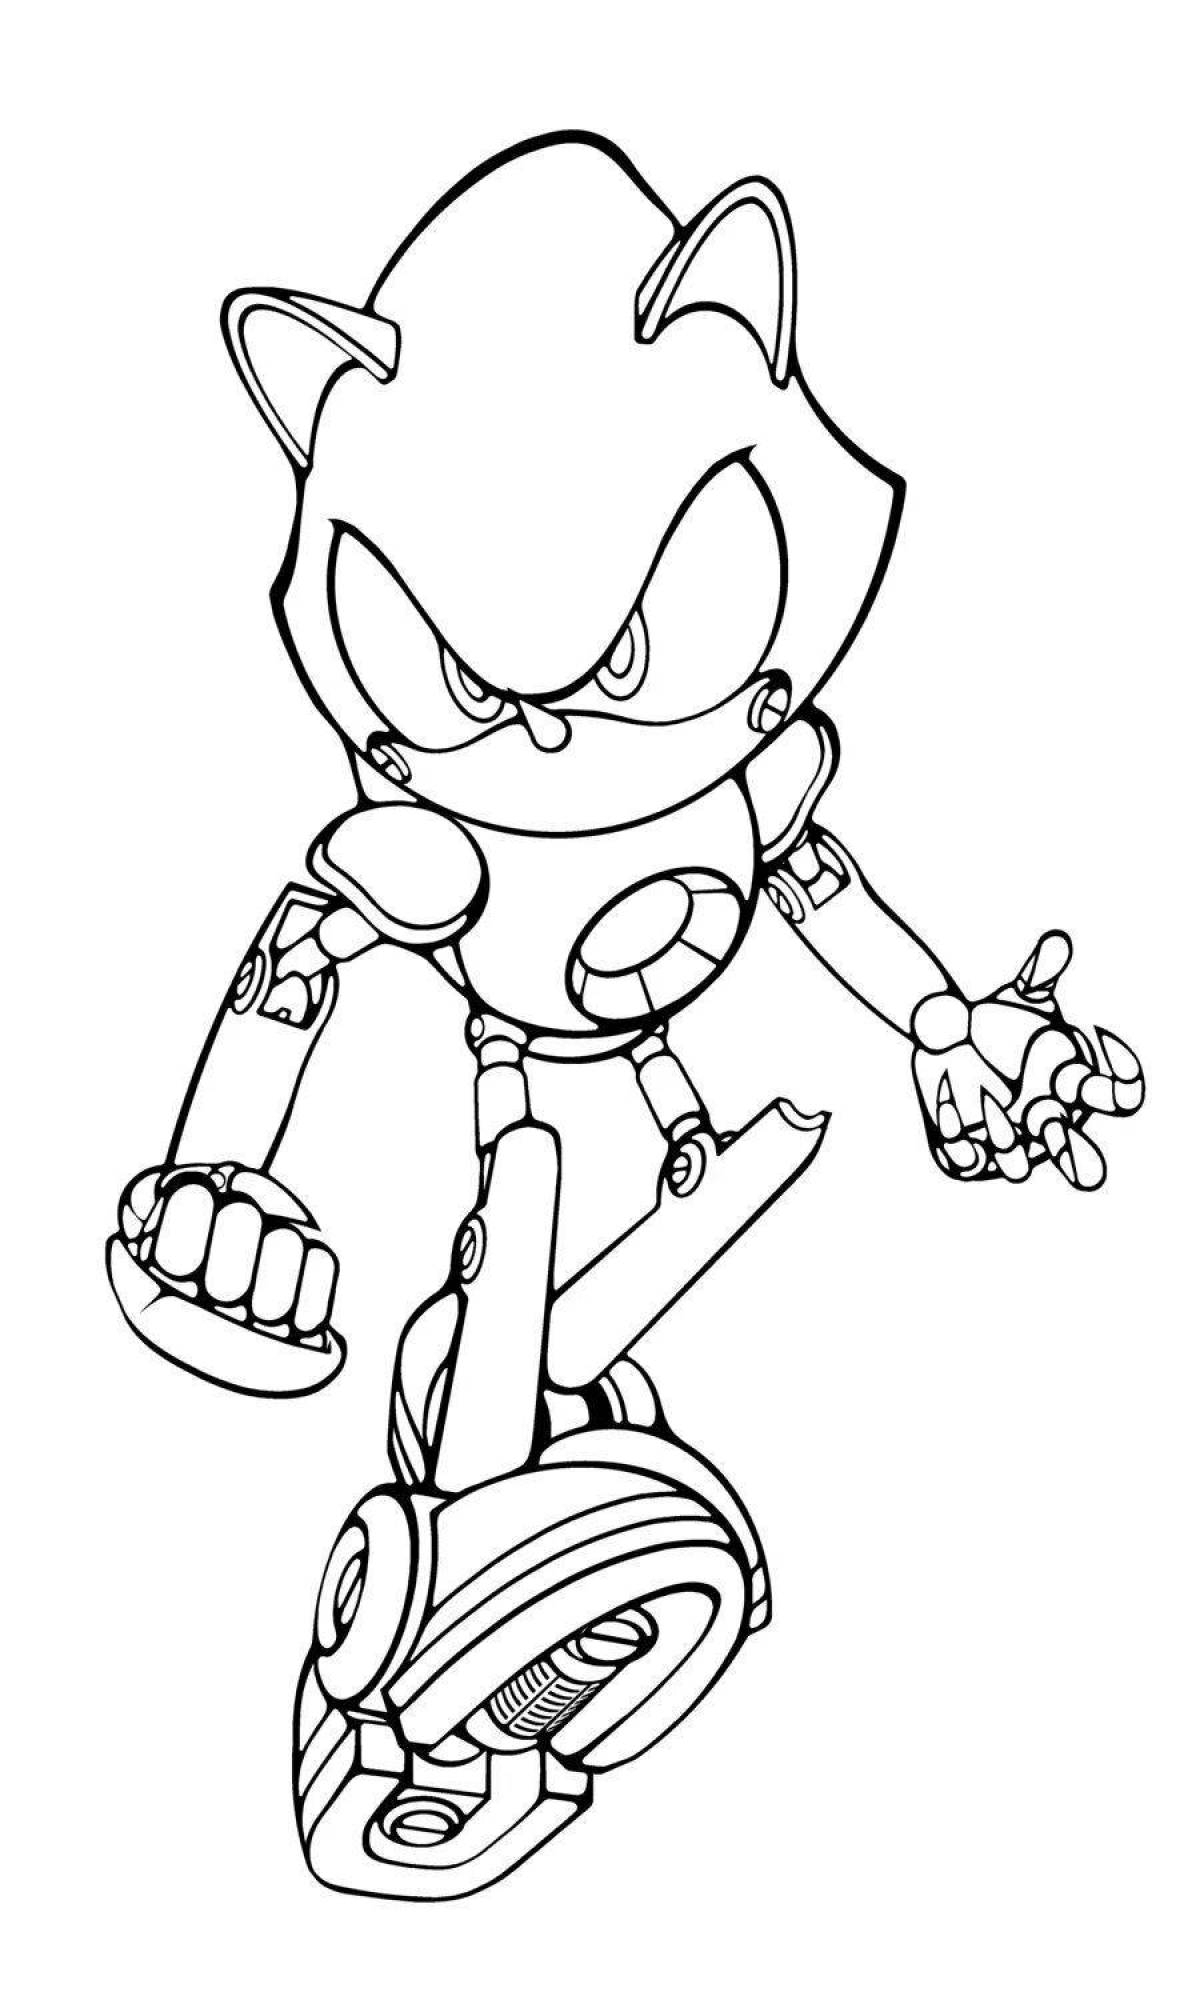 Colorful sonic iron coloring book